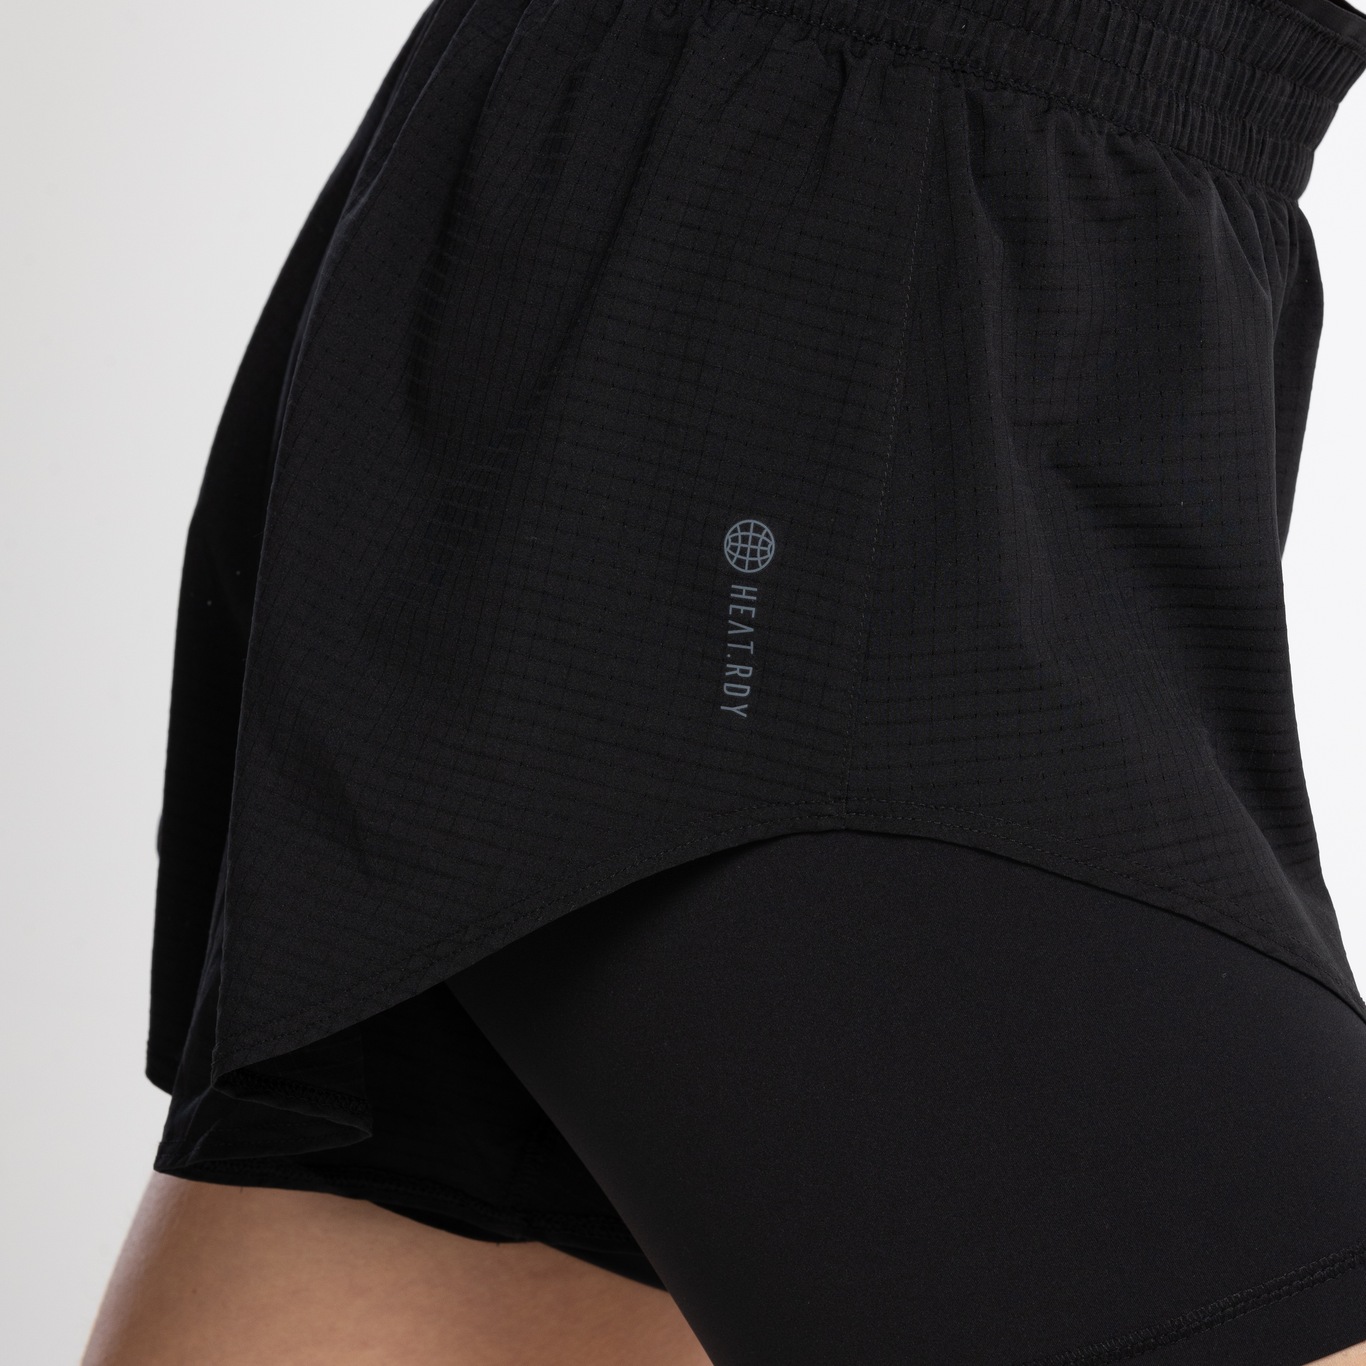 adidas Hiit Hr 2 In 1 Shorts Black